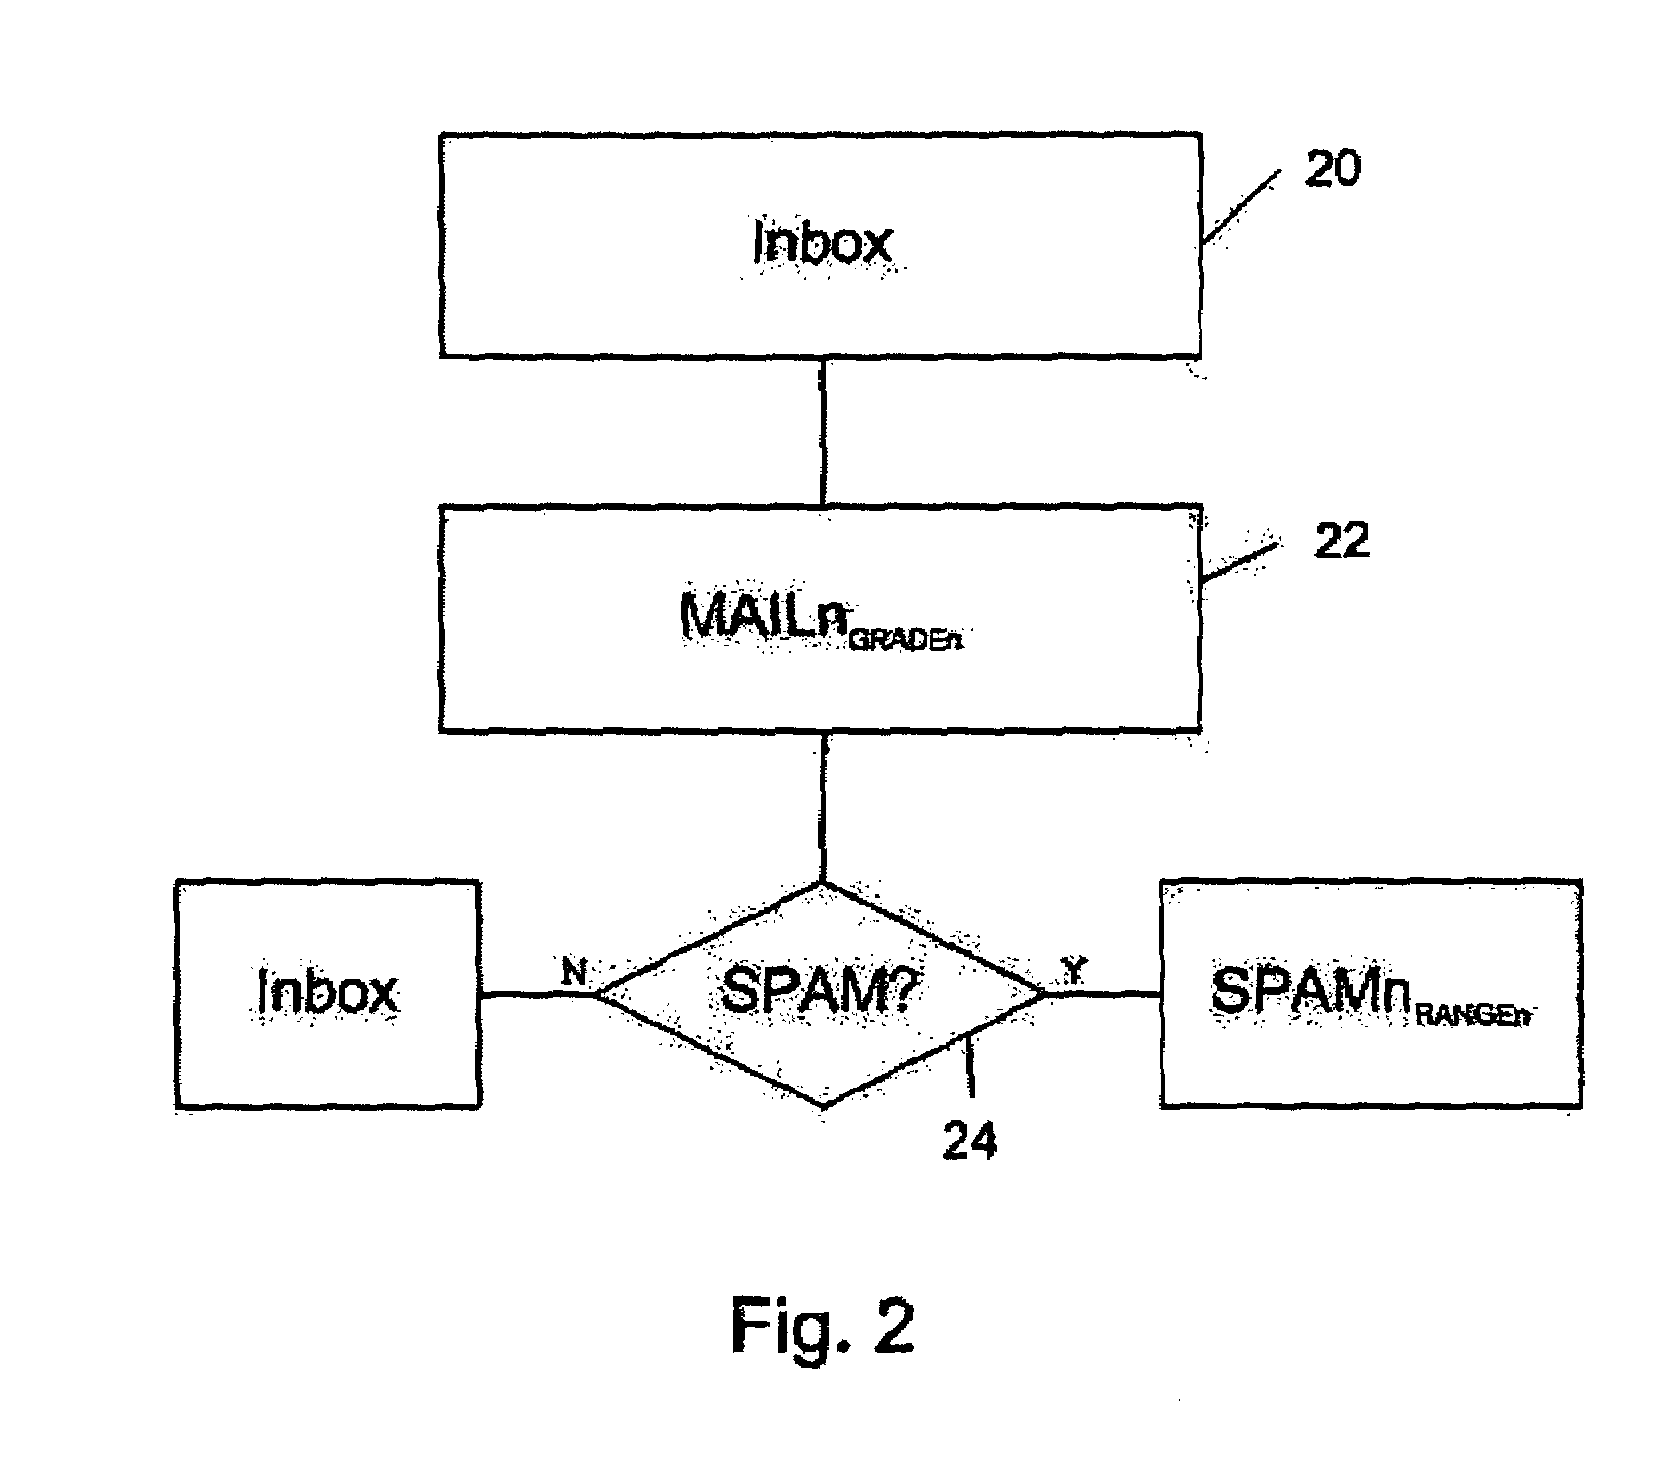 Classification of electronic mail into multiple directories based upon their spam-like properties